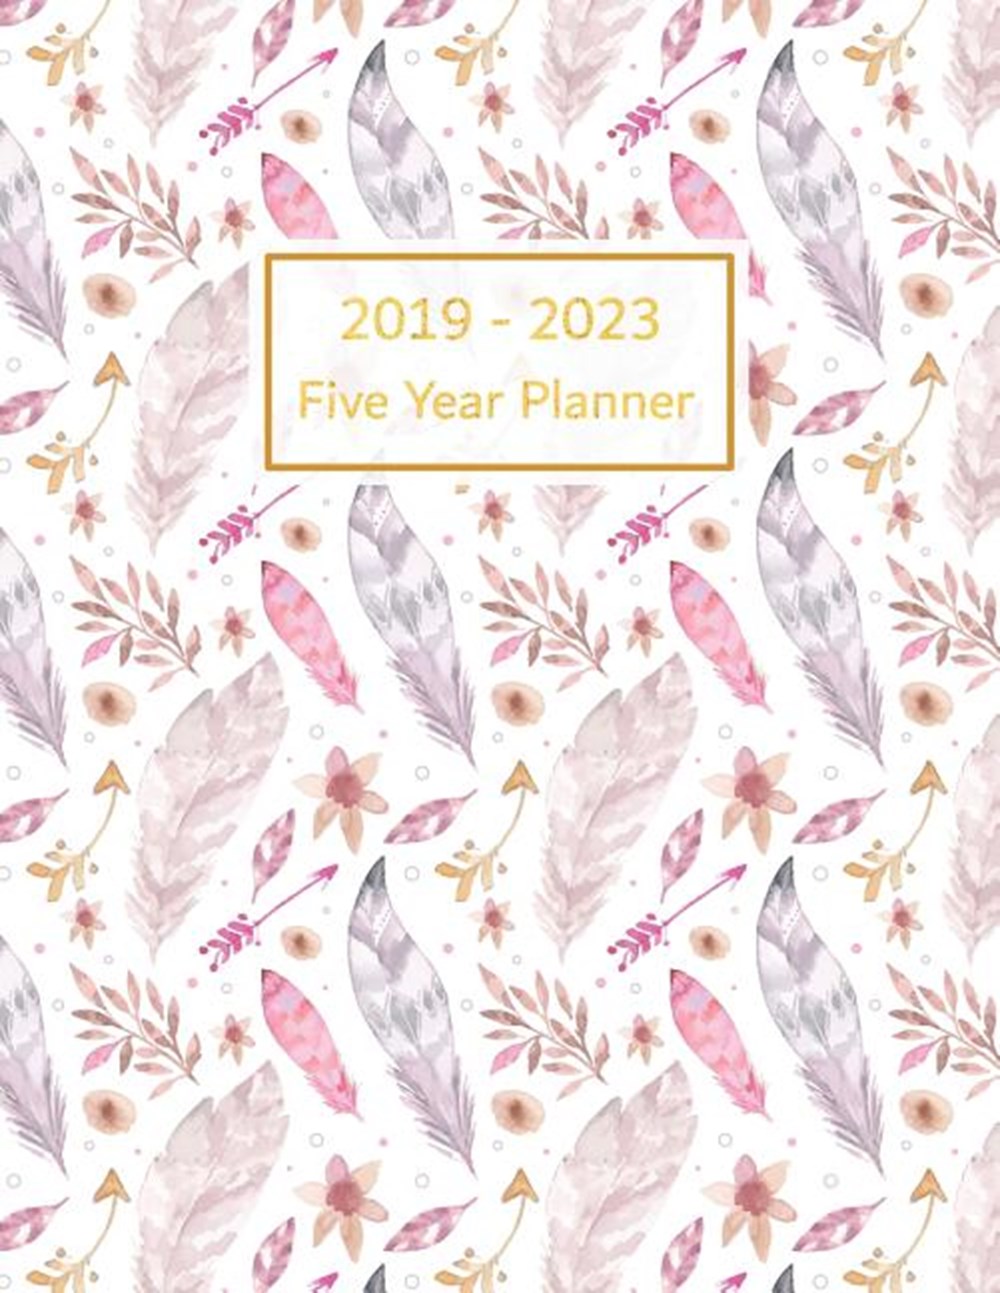 2019-2023 Five Year Planner 60 Months Calendar Yearly Personal Time Management Planner & Journal Goa